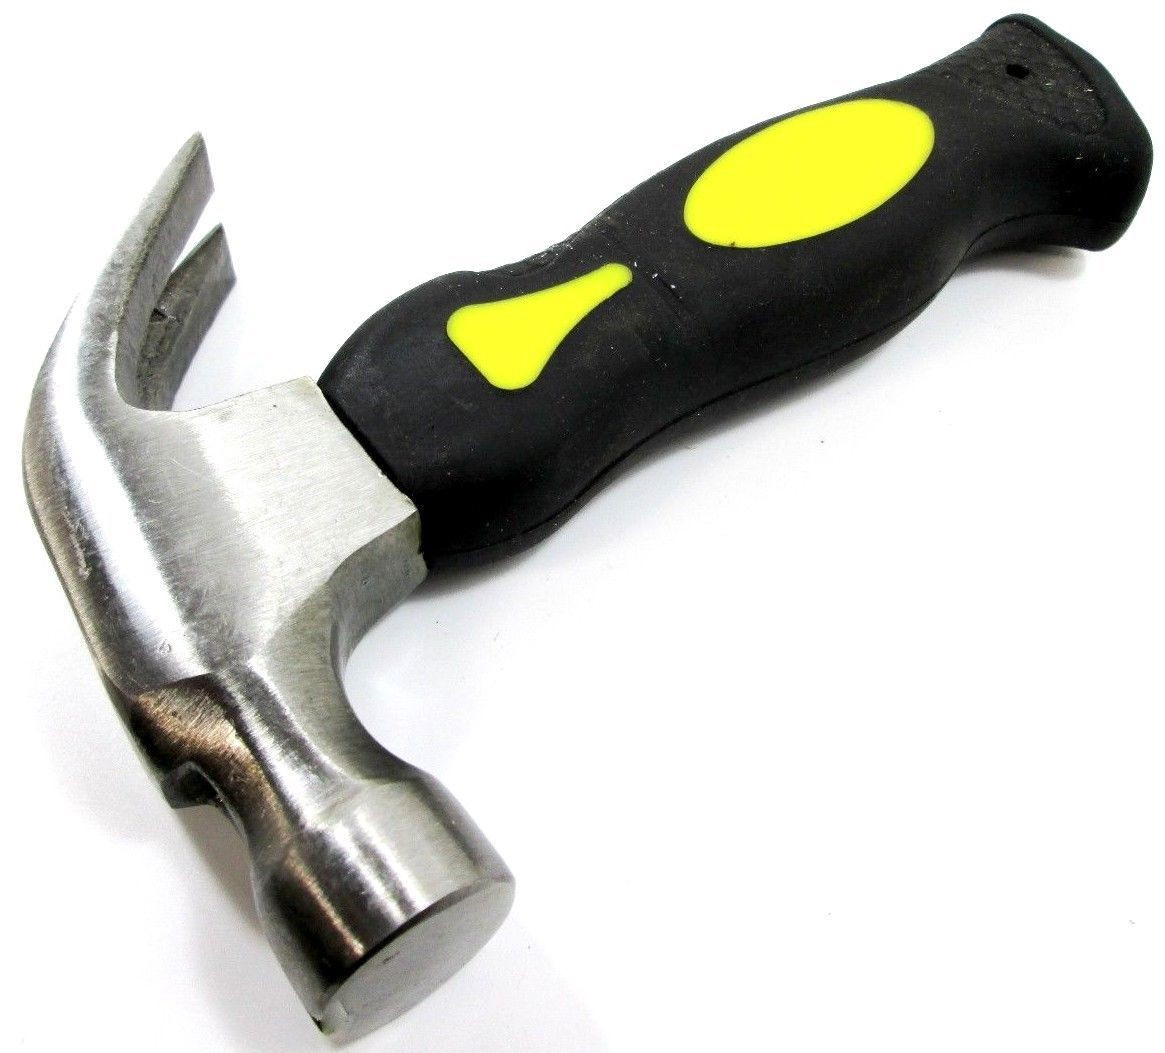 Mini Claw Hammer Stubby 10oz Magnetic Head Soft Grip Nail Puller Finger HM155